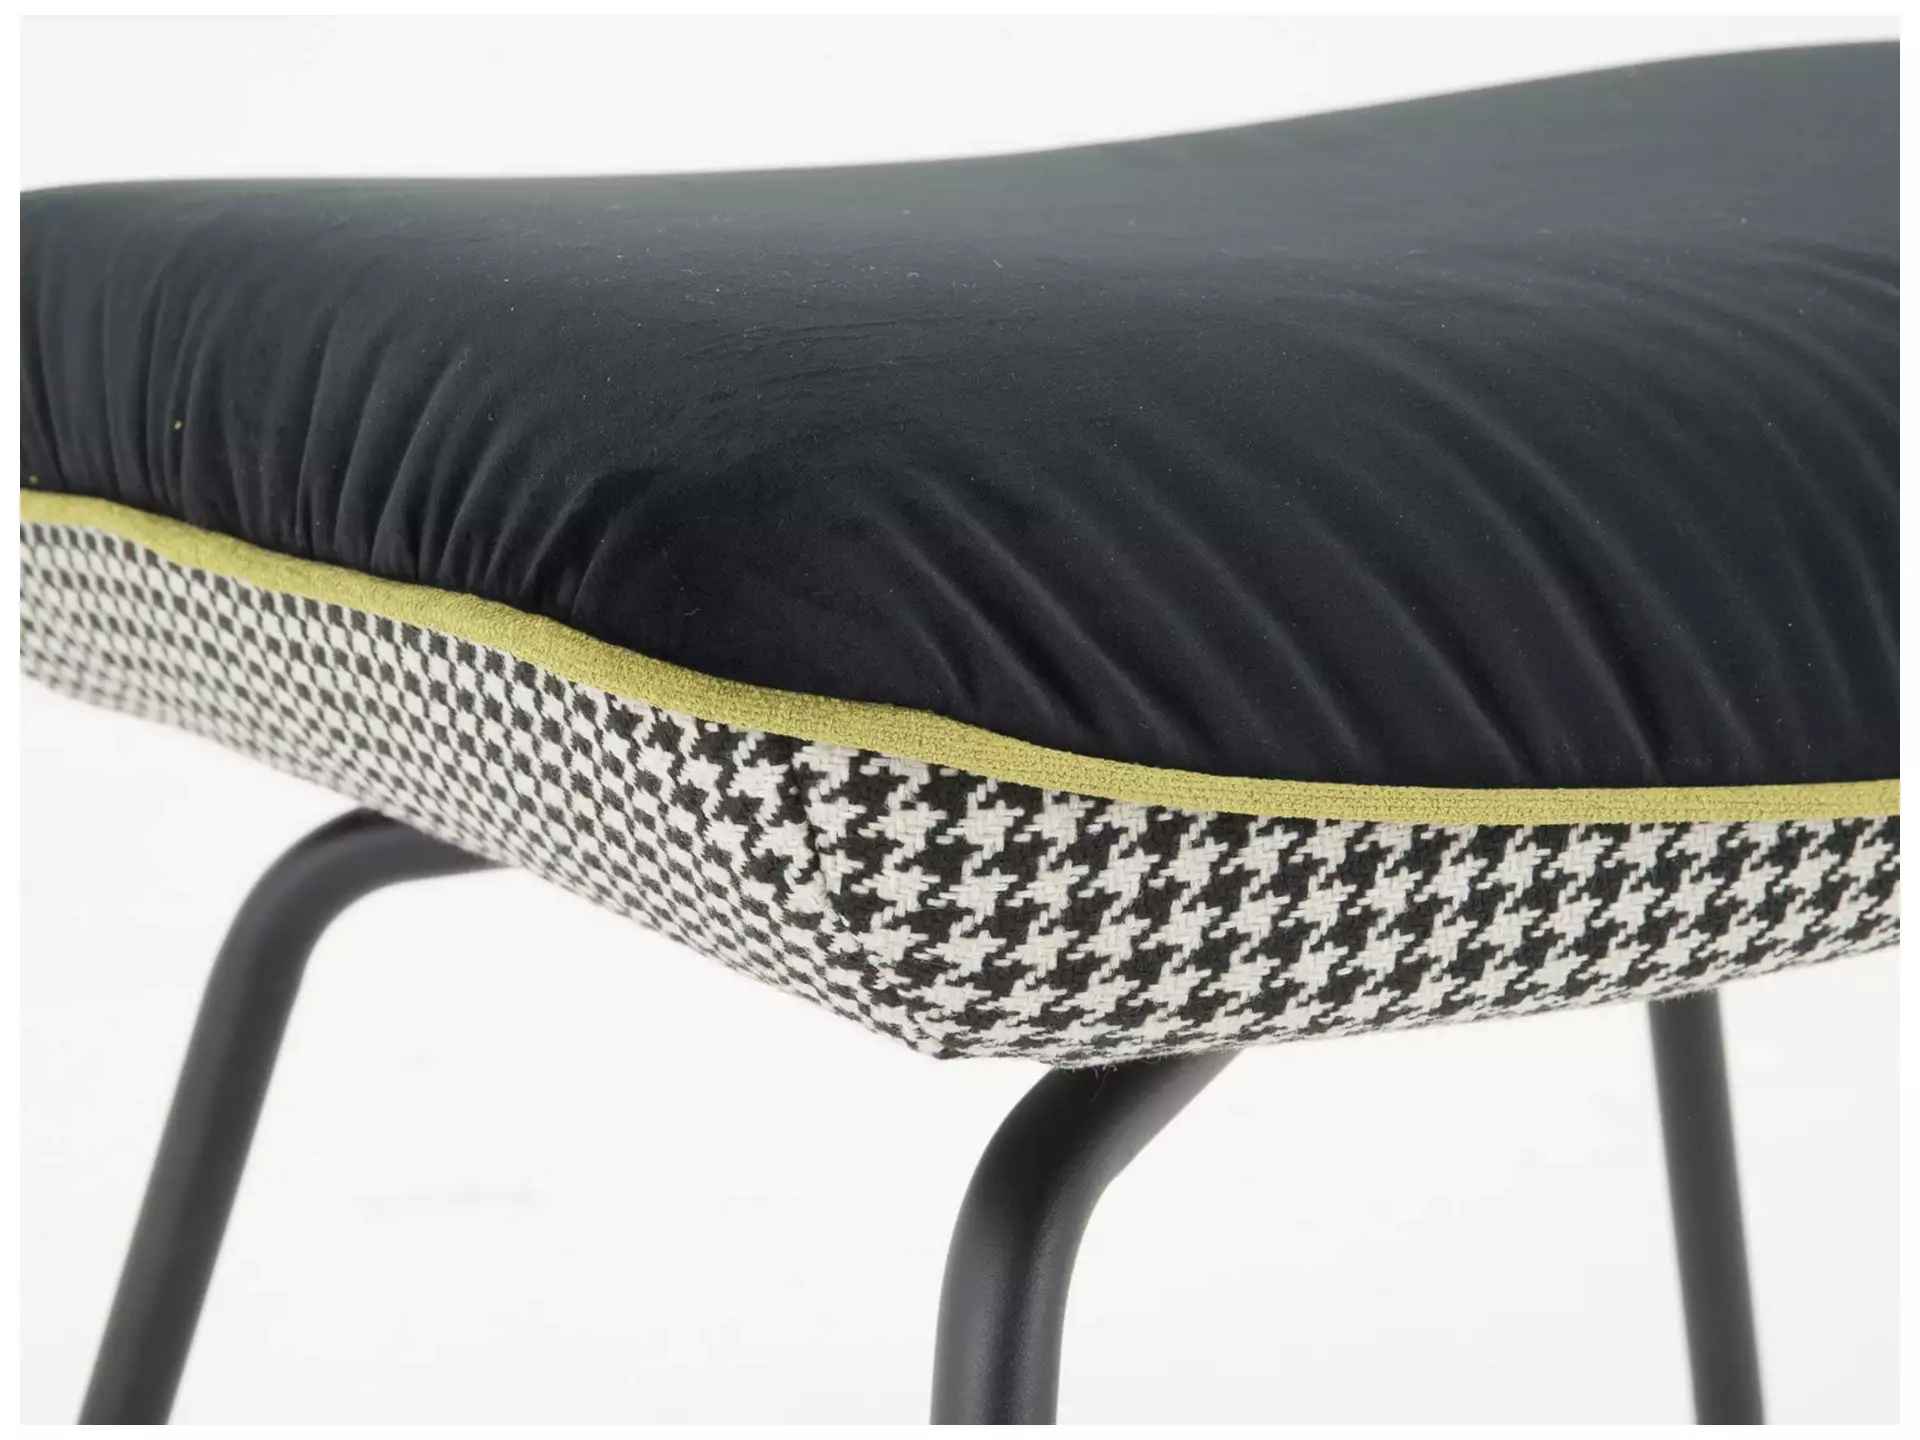 Hocker Mixable Candy / Farbe: Black / Bezugsmaterial: Stoff